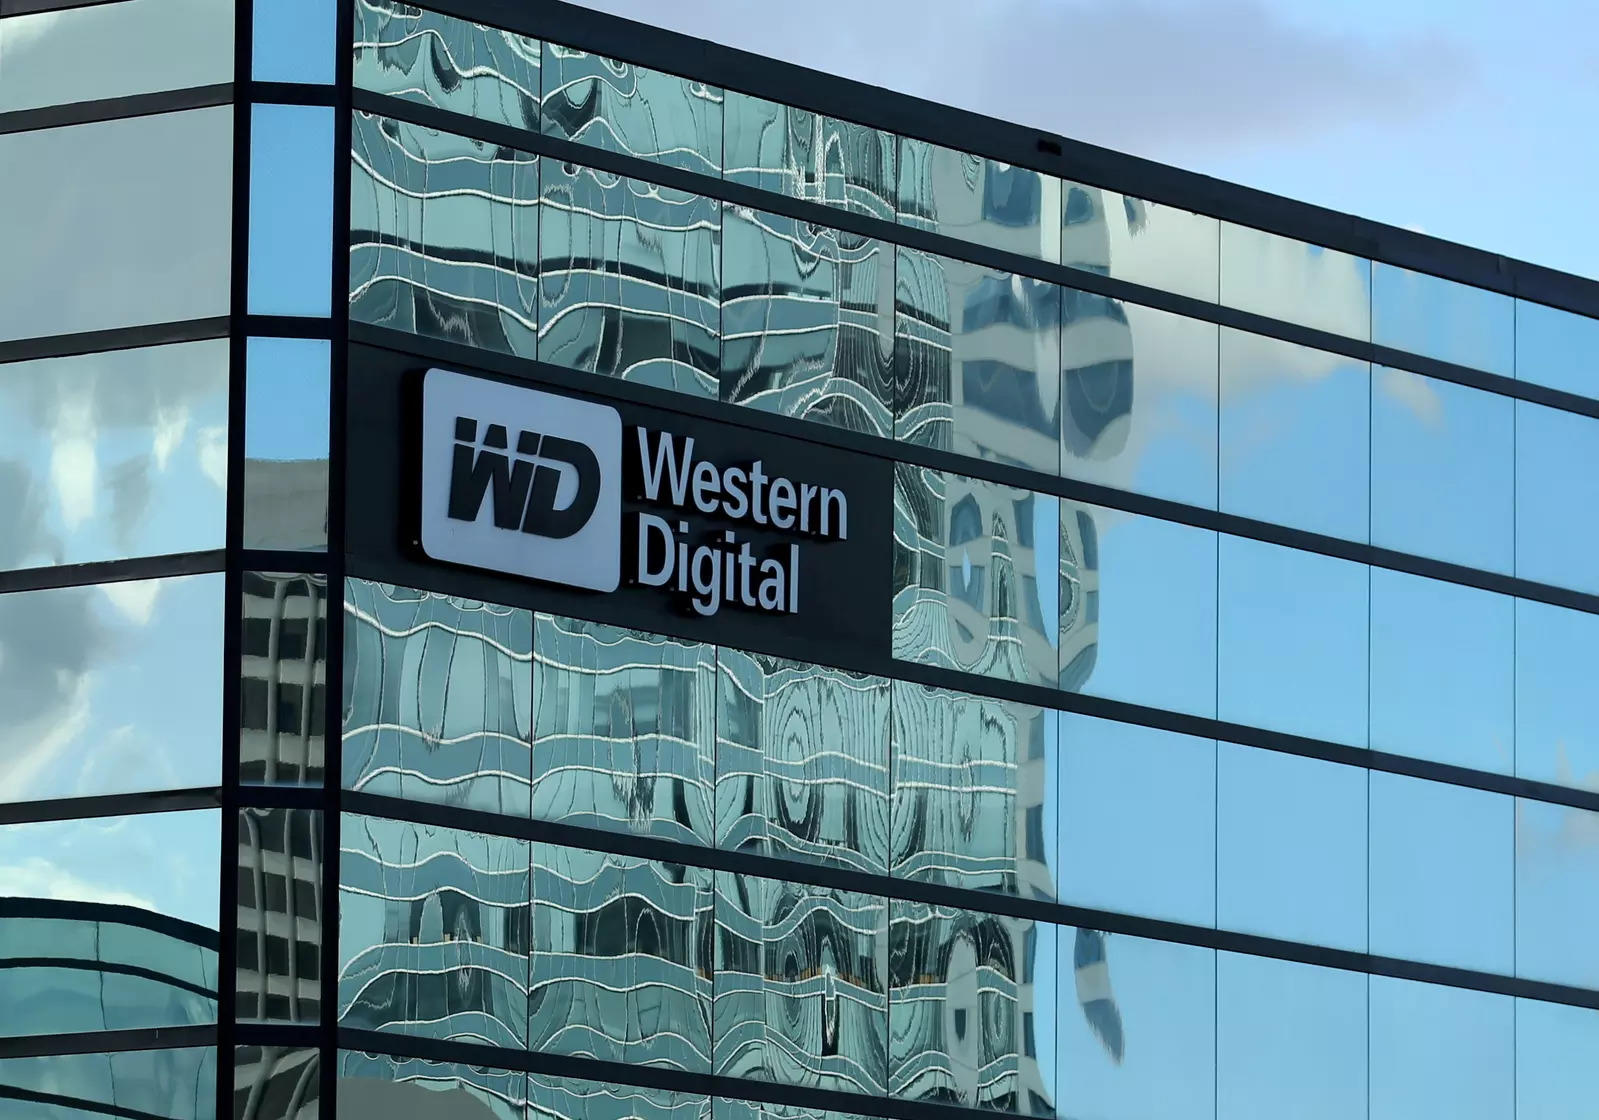 Merger talks between Western Digital and Kioxia stall: Sources